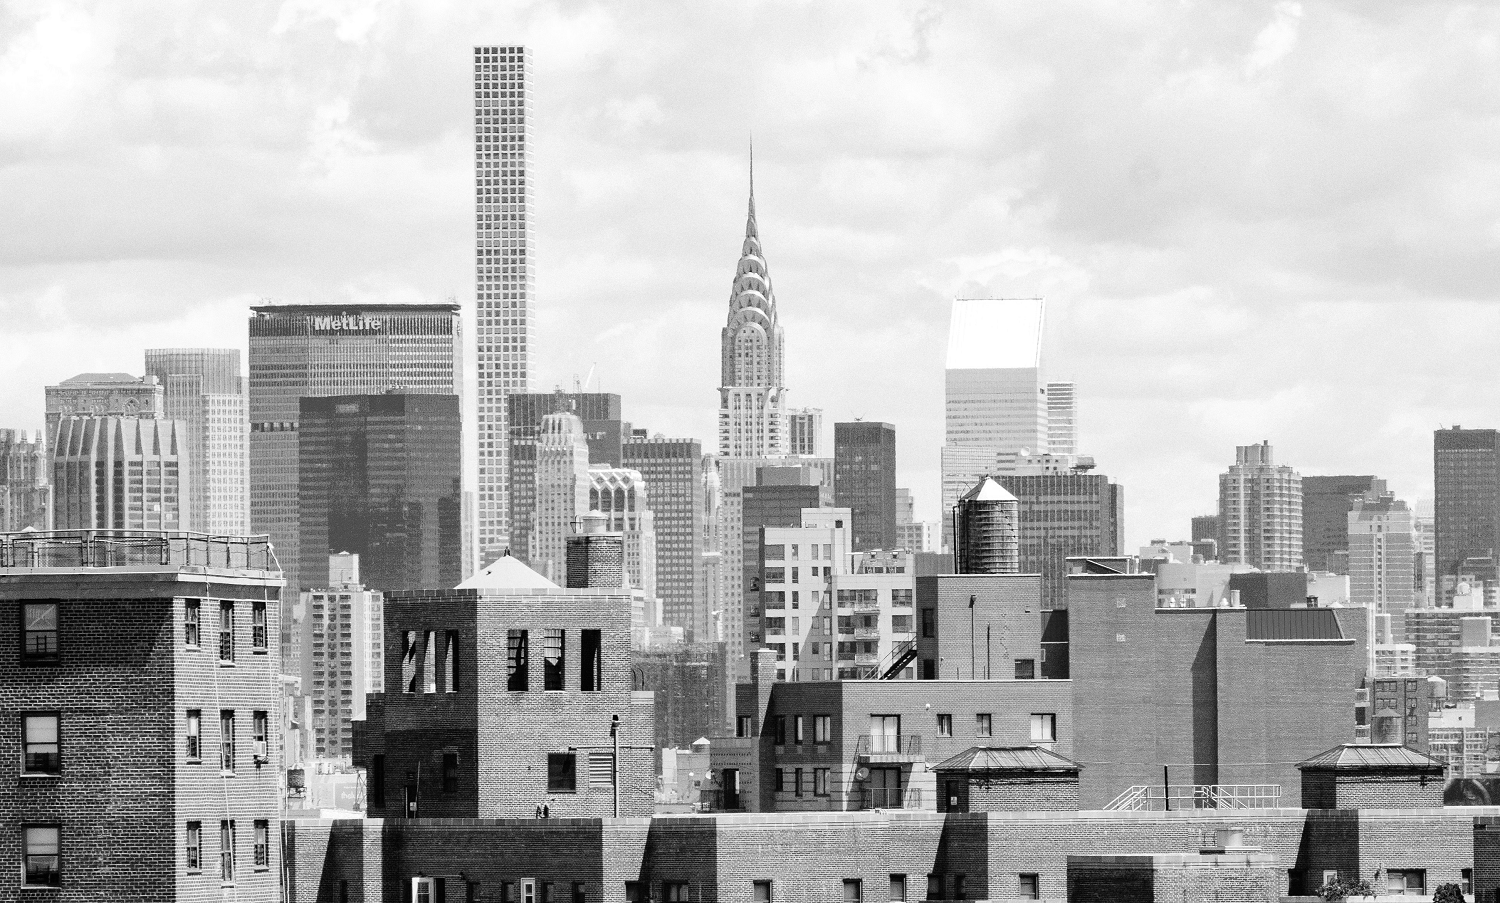 This is a black and white image of the New York skyline